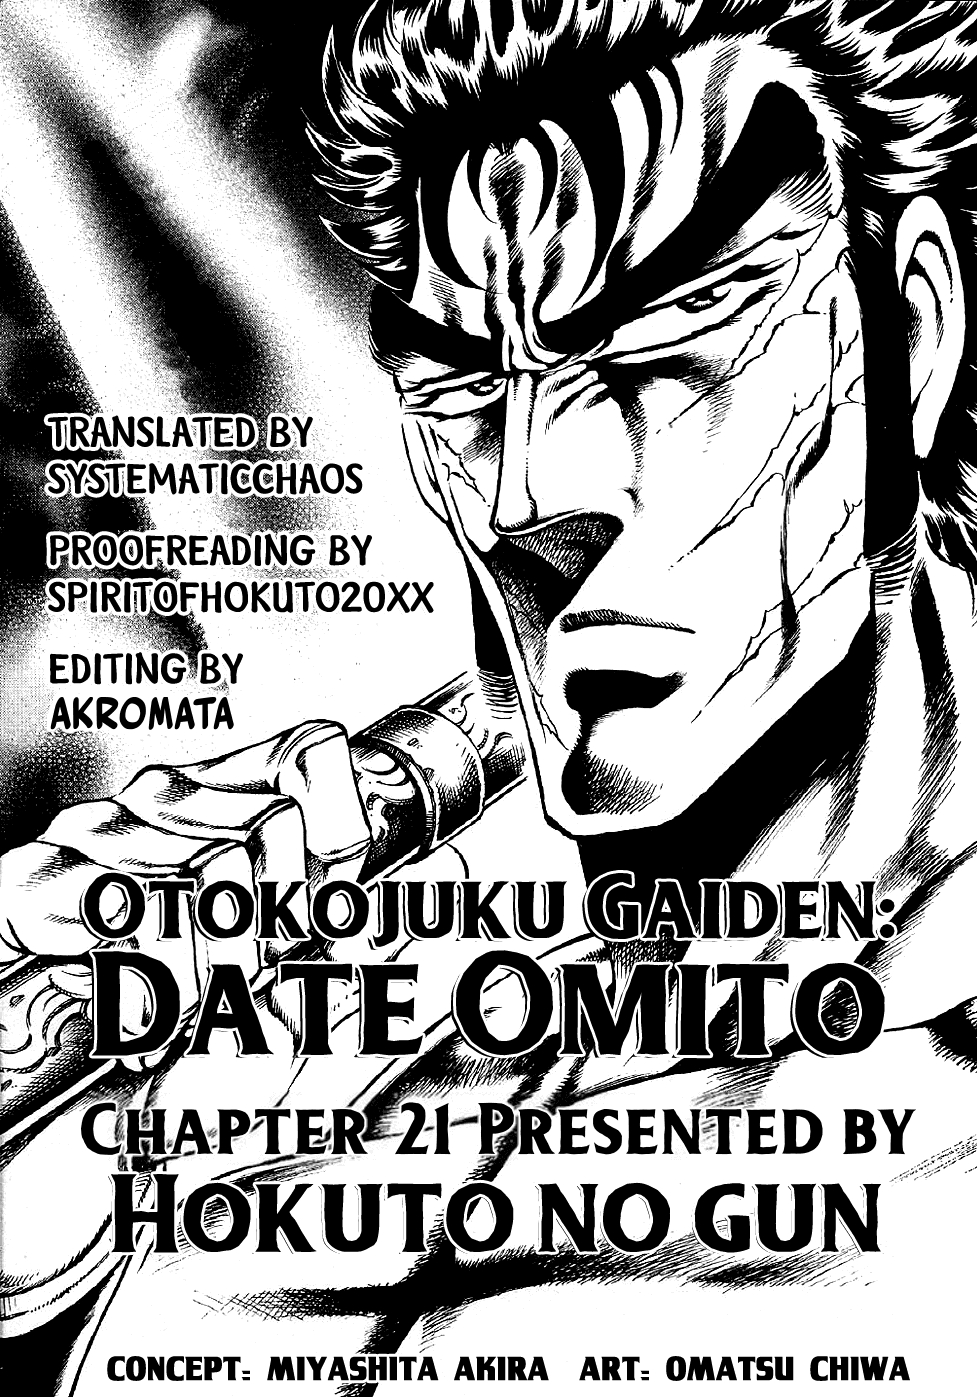 Otokojuku Gaiden Date Omito Vol. 3 Ch. 21 In Search of the Strong